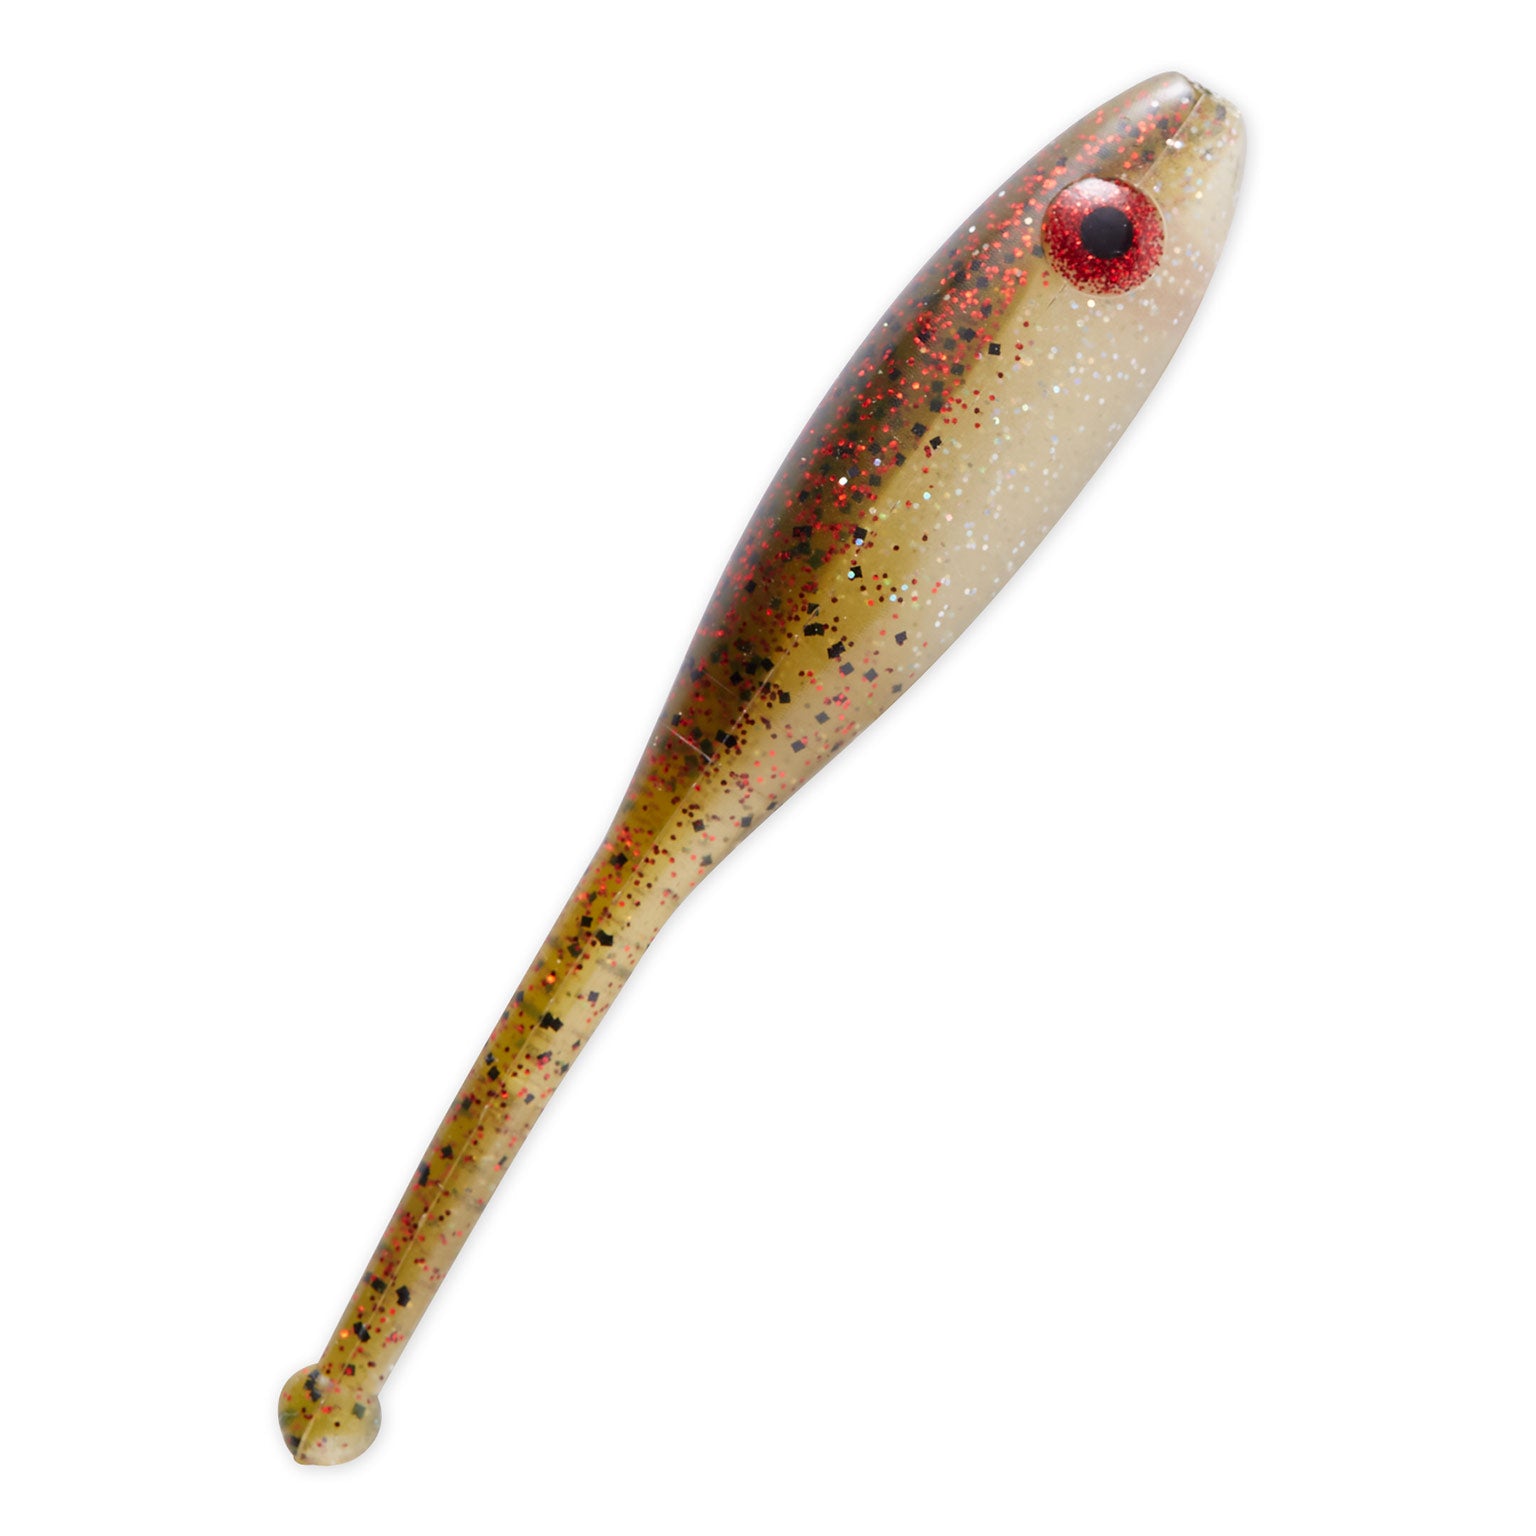 Pure Flats - Catch Trout NOW! SLICK lure